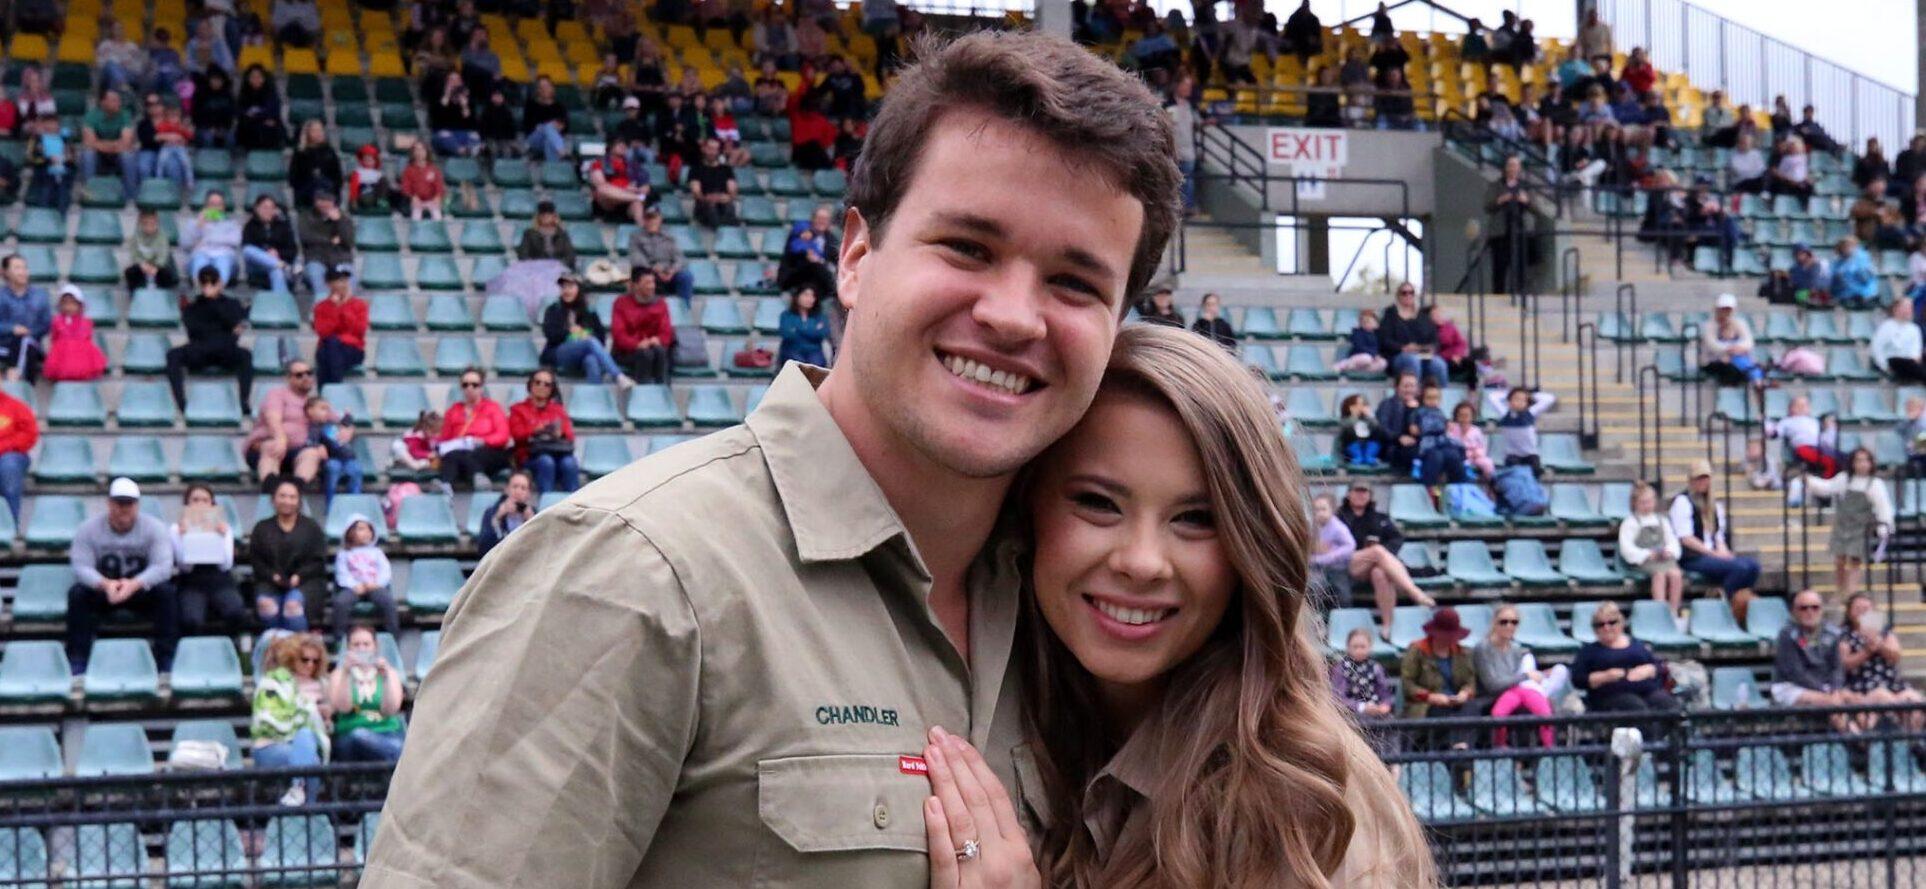 Bindi Irwin Throws Birthday Bash For Husband Chandler Powell: ‘One Of My Favorite Things In The World’